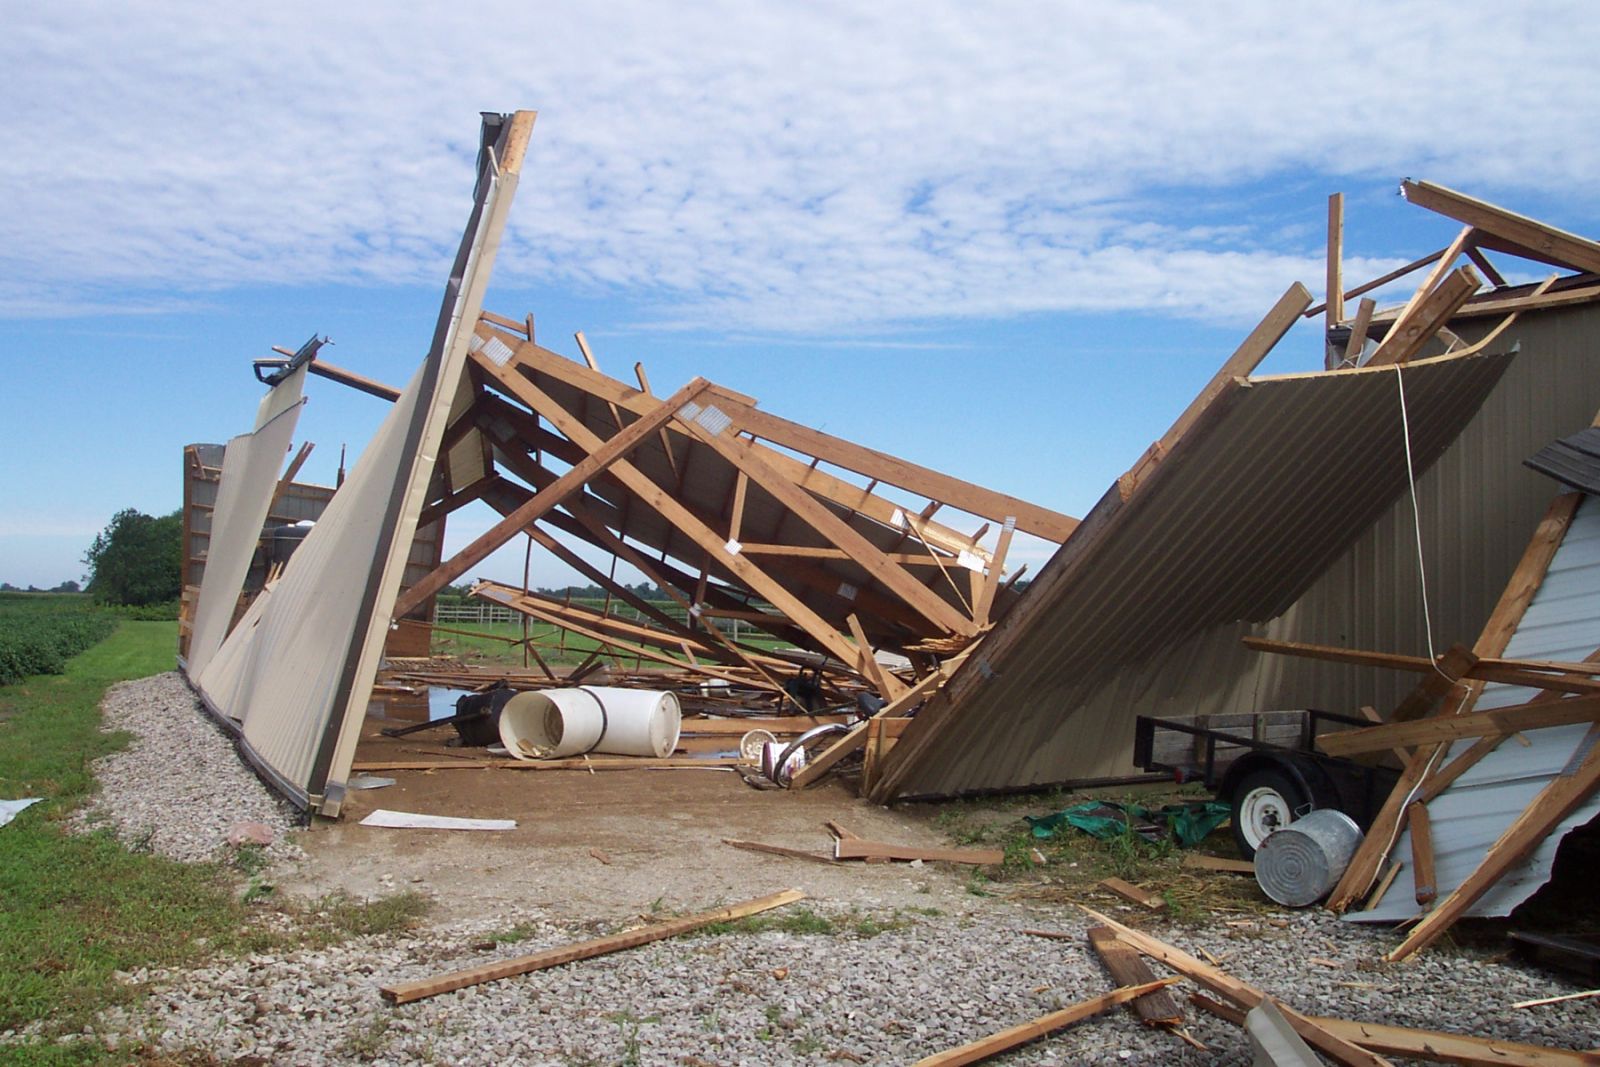 F2 damage to a barn. The barn door was left open, which allowed the wind to enter the structure and lift the roof off.